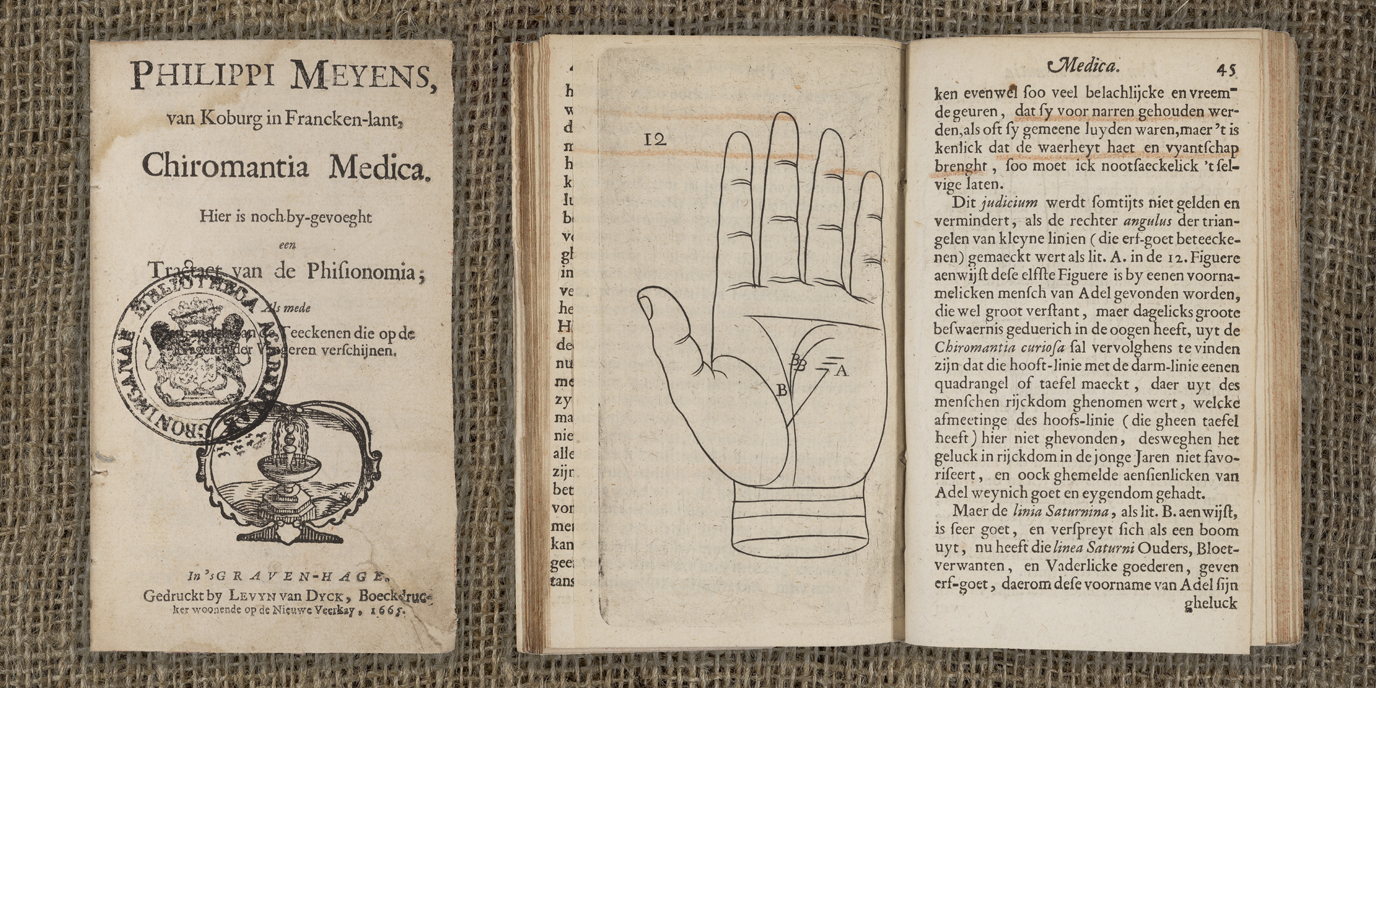 In this copy of Philip Meyens' 'Chiromantia Medica'Chiromantia Medica' from 1665 we see that, throughout the book, certain sentences are underlined. This treatise on physiognomy and palm-reading contains all kinds of notes in the margins and even an autograph of the author.